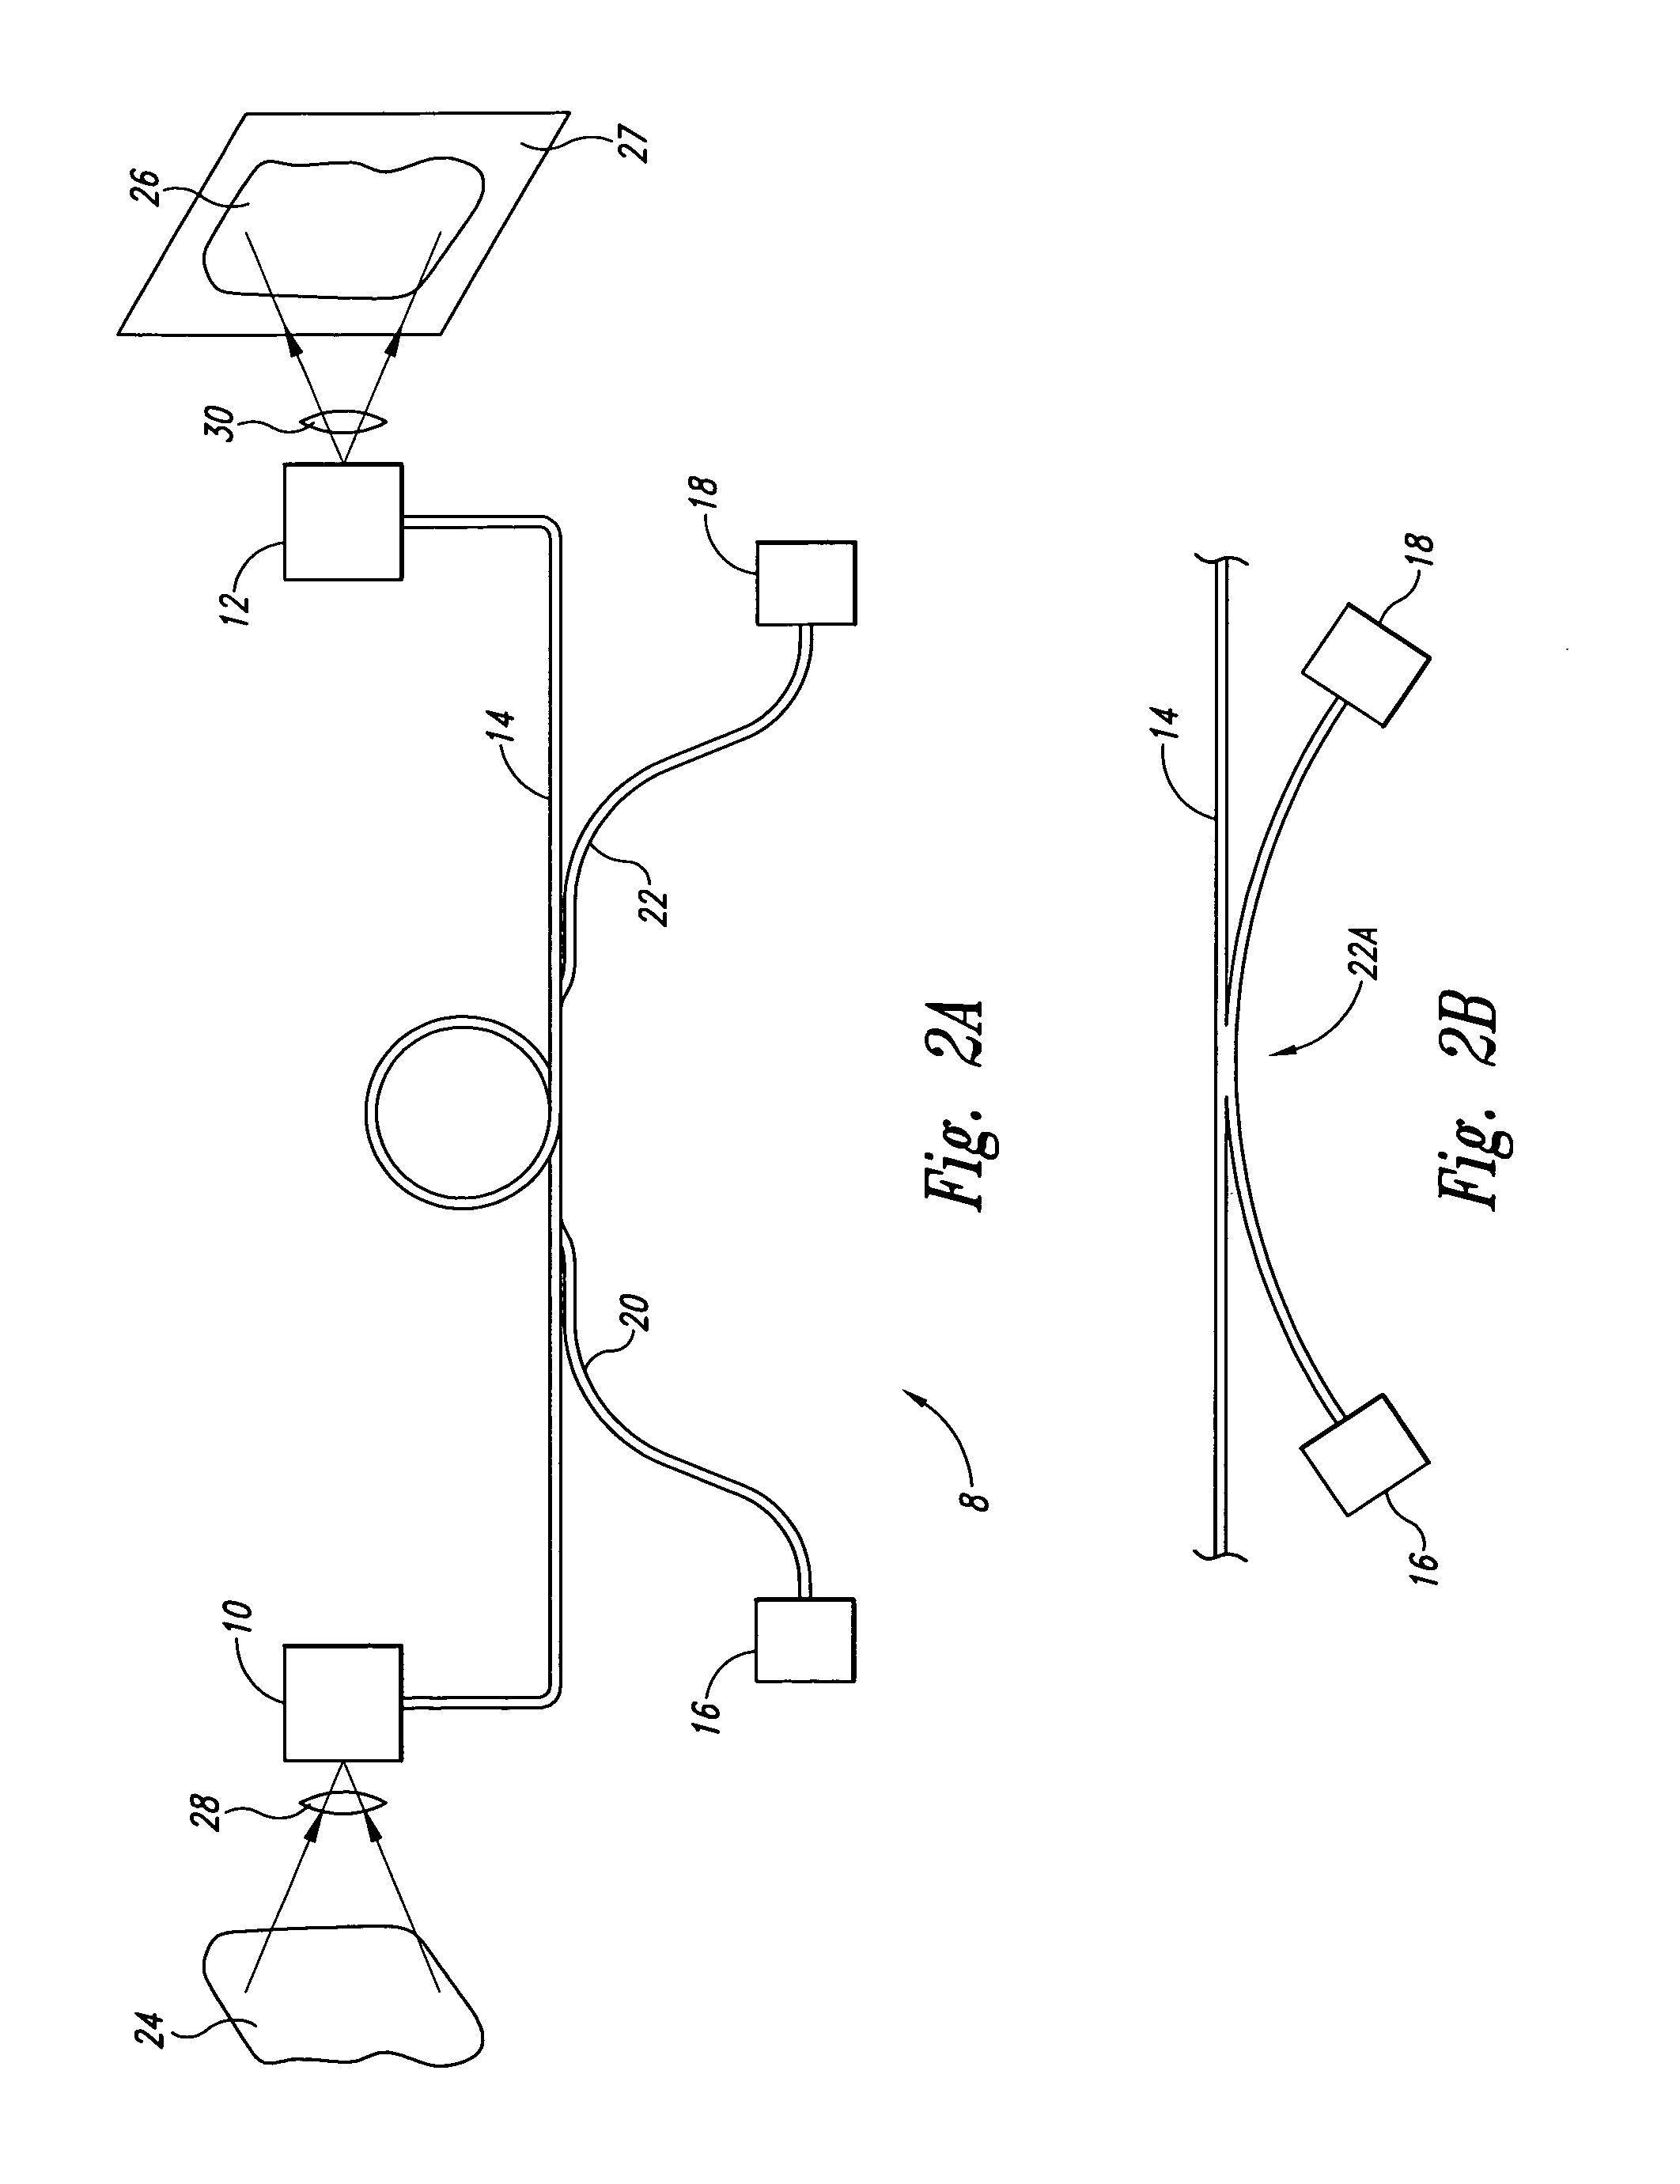 Apparatus for remotely imaging a region